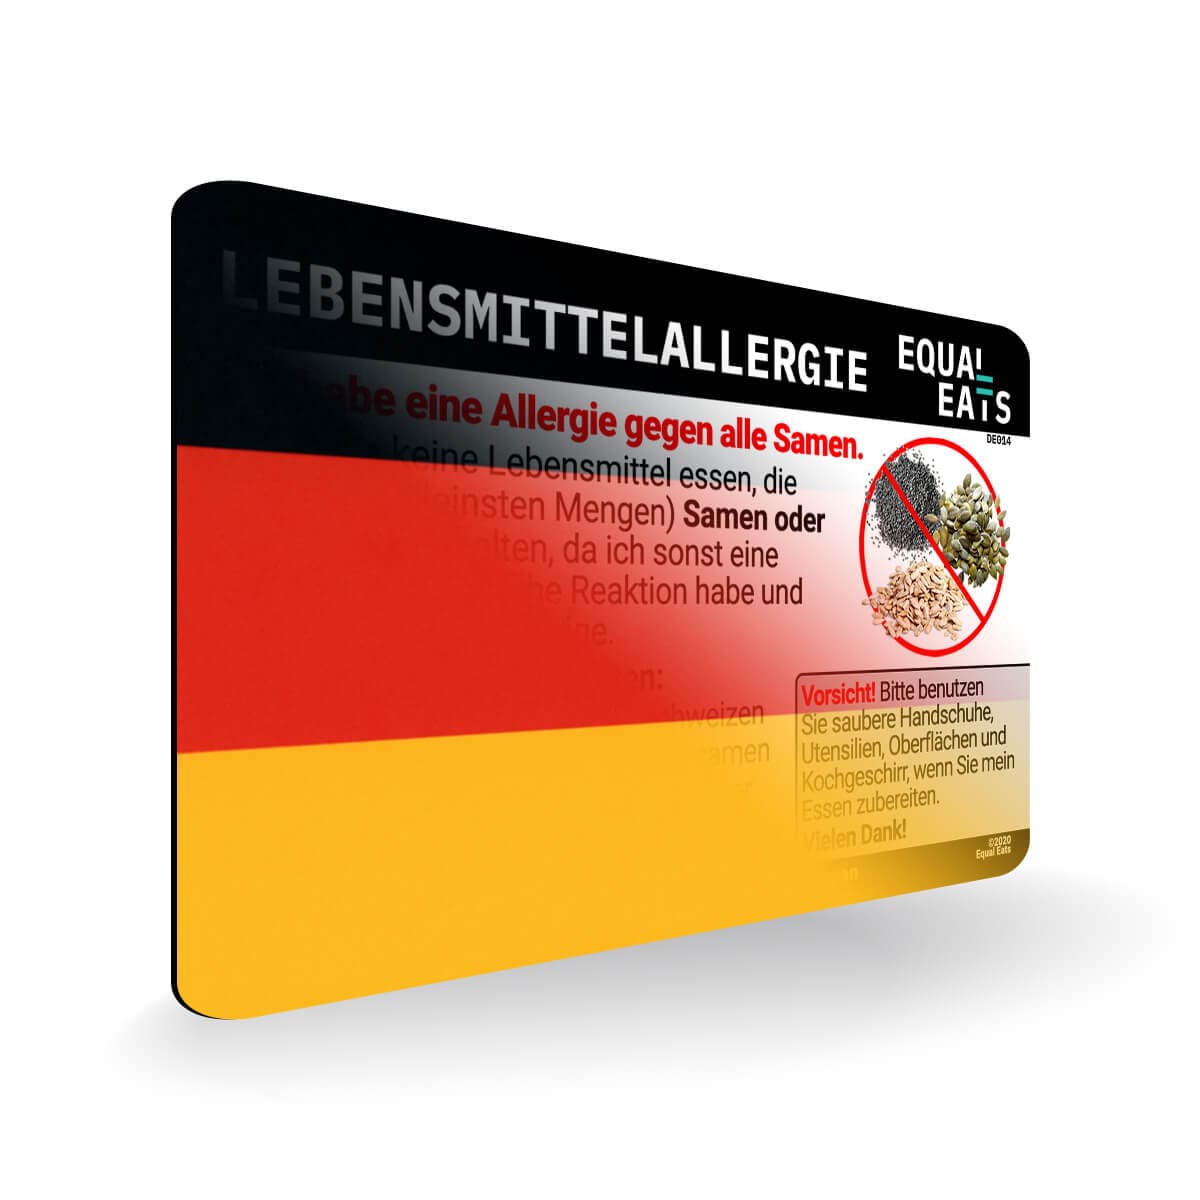 Seed Allergy in German. Seed Allergy Card for Germany